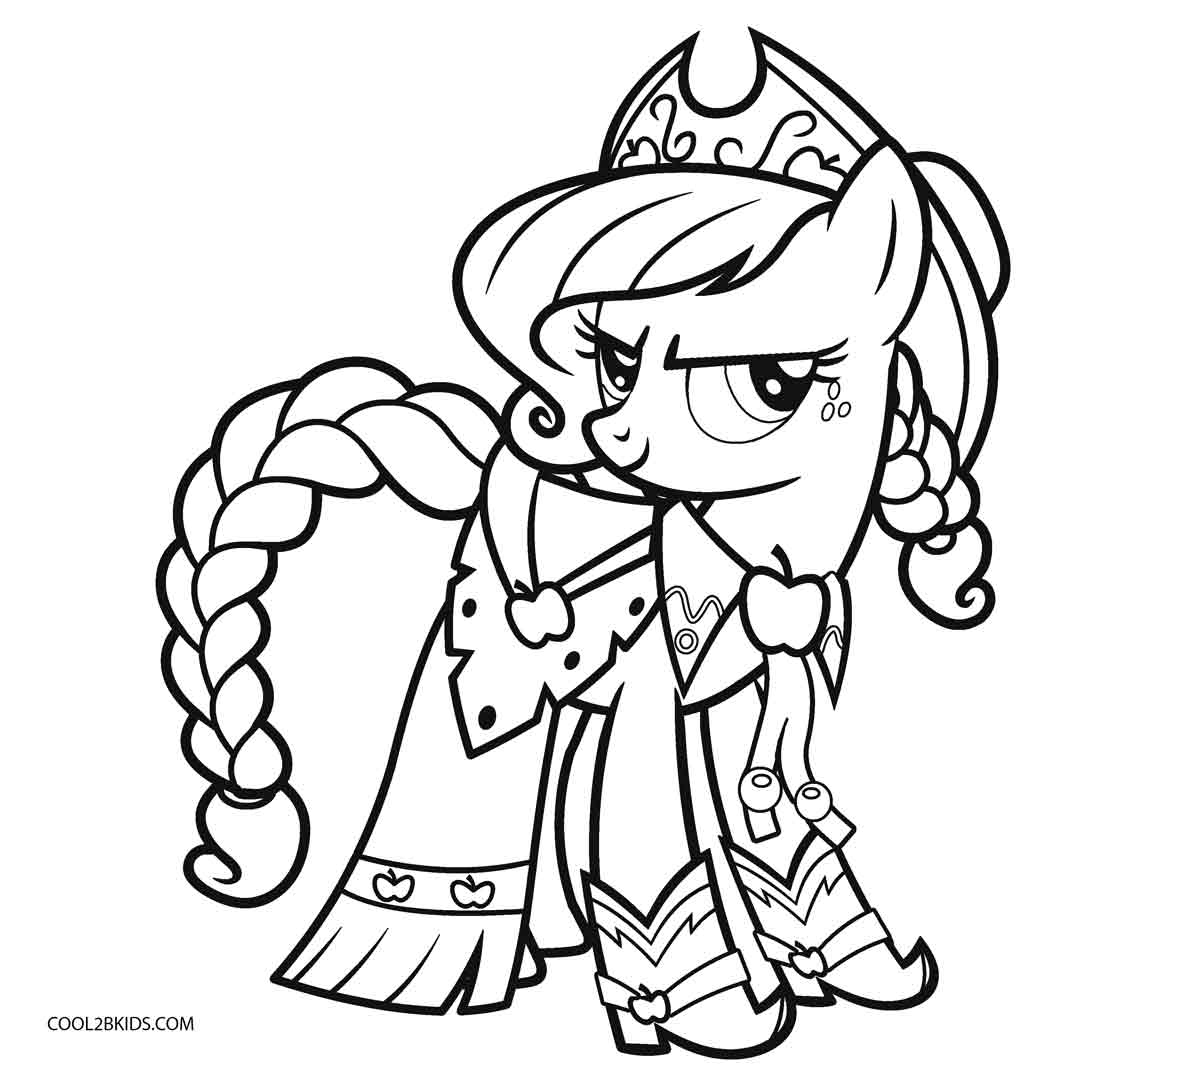 My Little Pony Coloring Pages To Print - Coloriagefree.club - Free Printable My Little Pony Coloring Pages